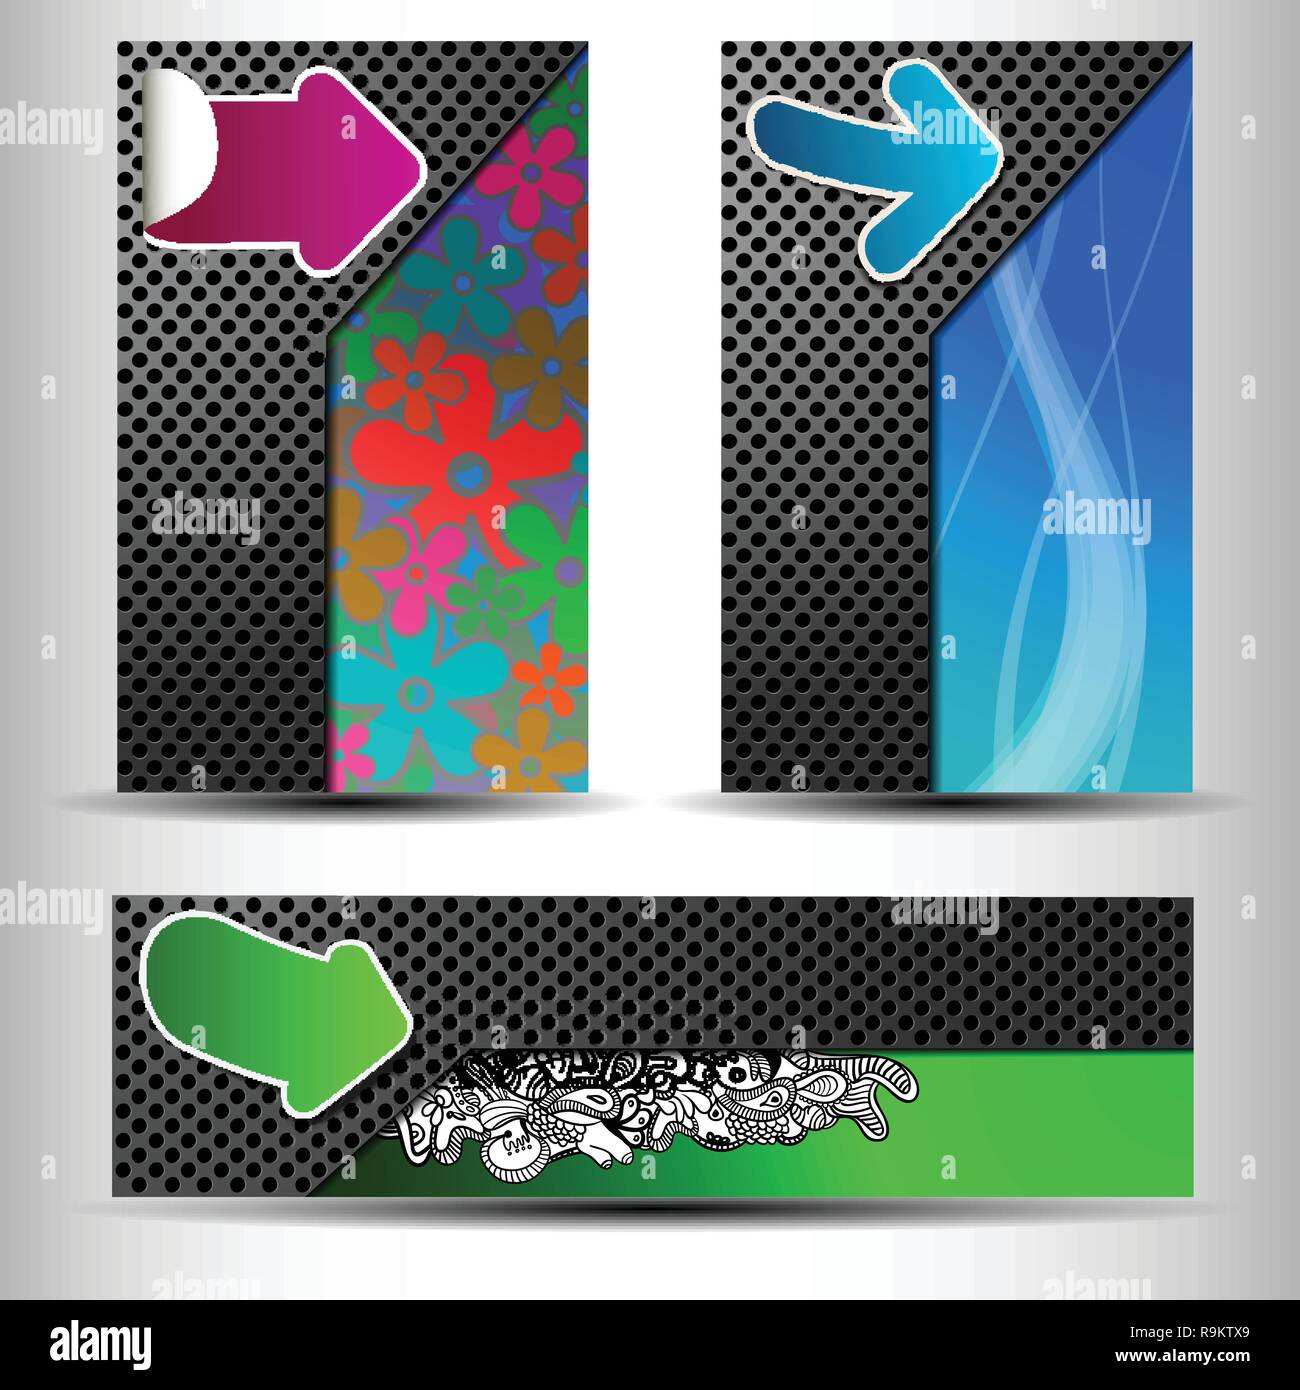 Set of Three Colorful Folder Shaped Banners with World Map, Abstract Background Design for Web - Template Illustration in Vector Format Stock Vector